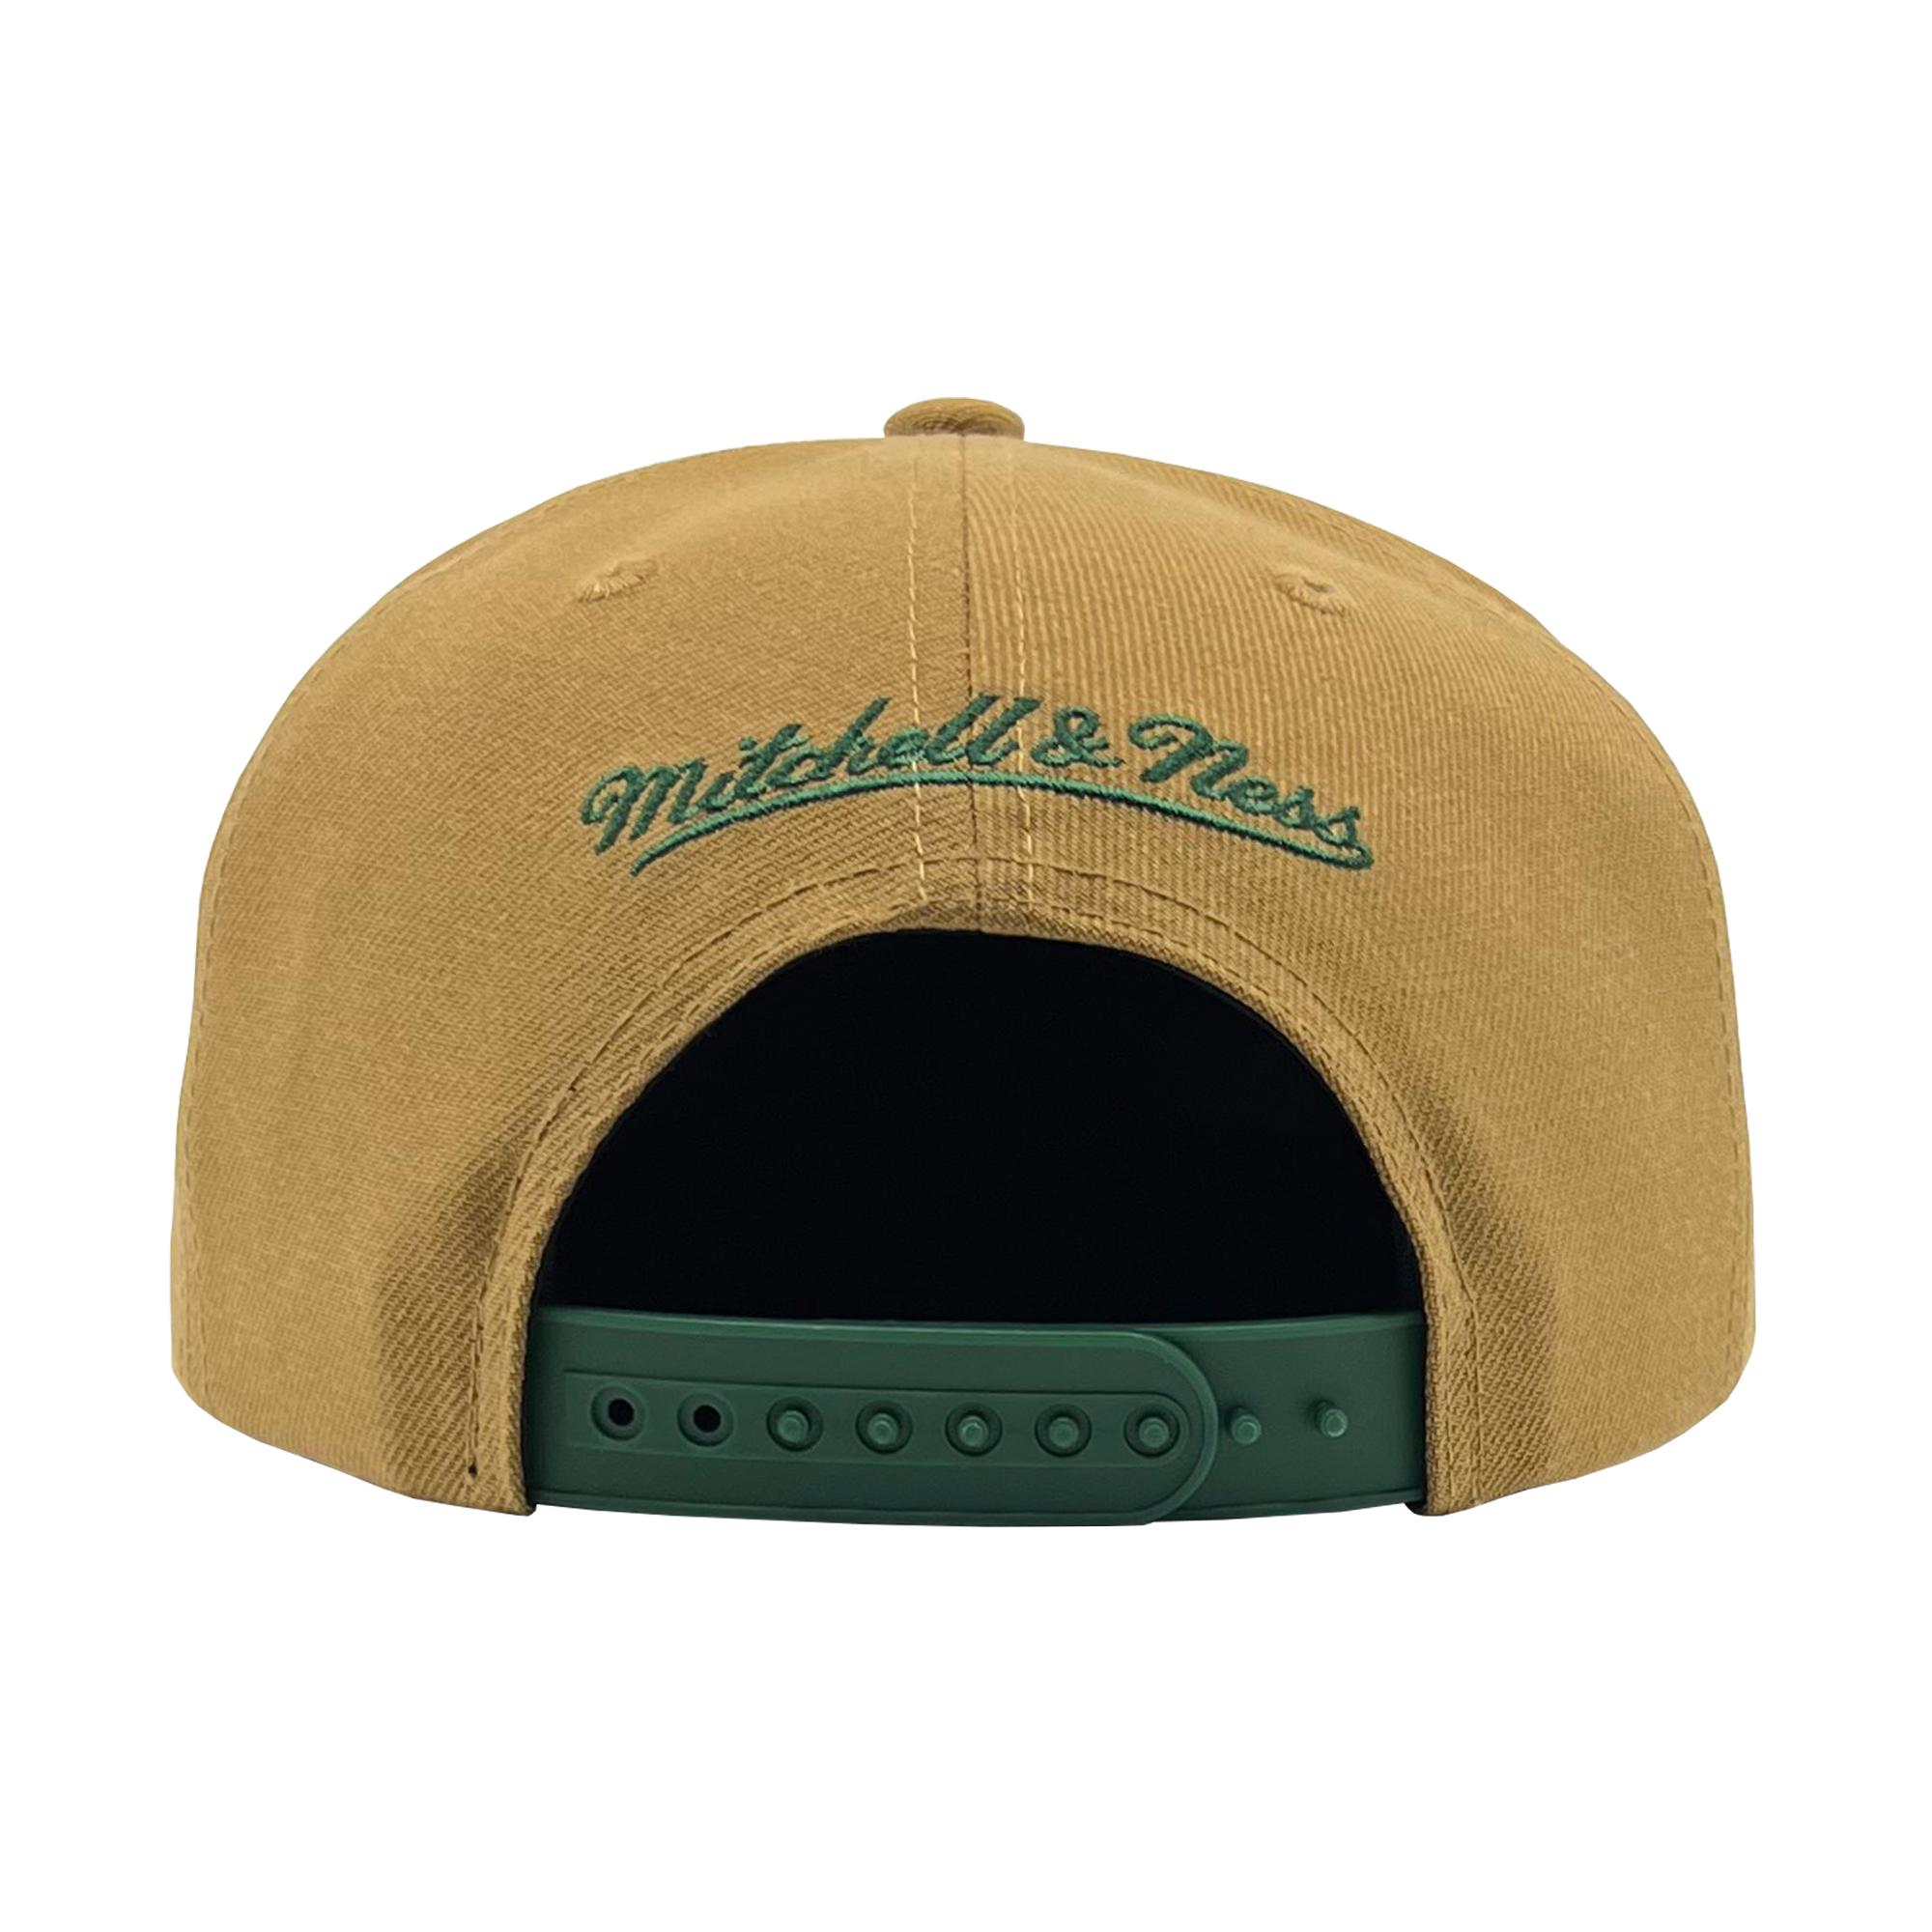 Back view of a brown snapback cap with green embroidered Mitchell & Ness wordmark. 